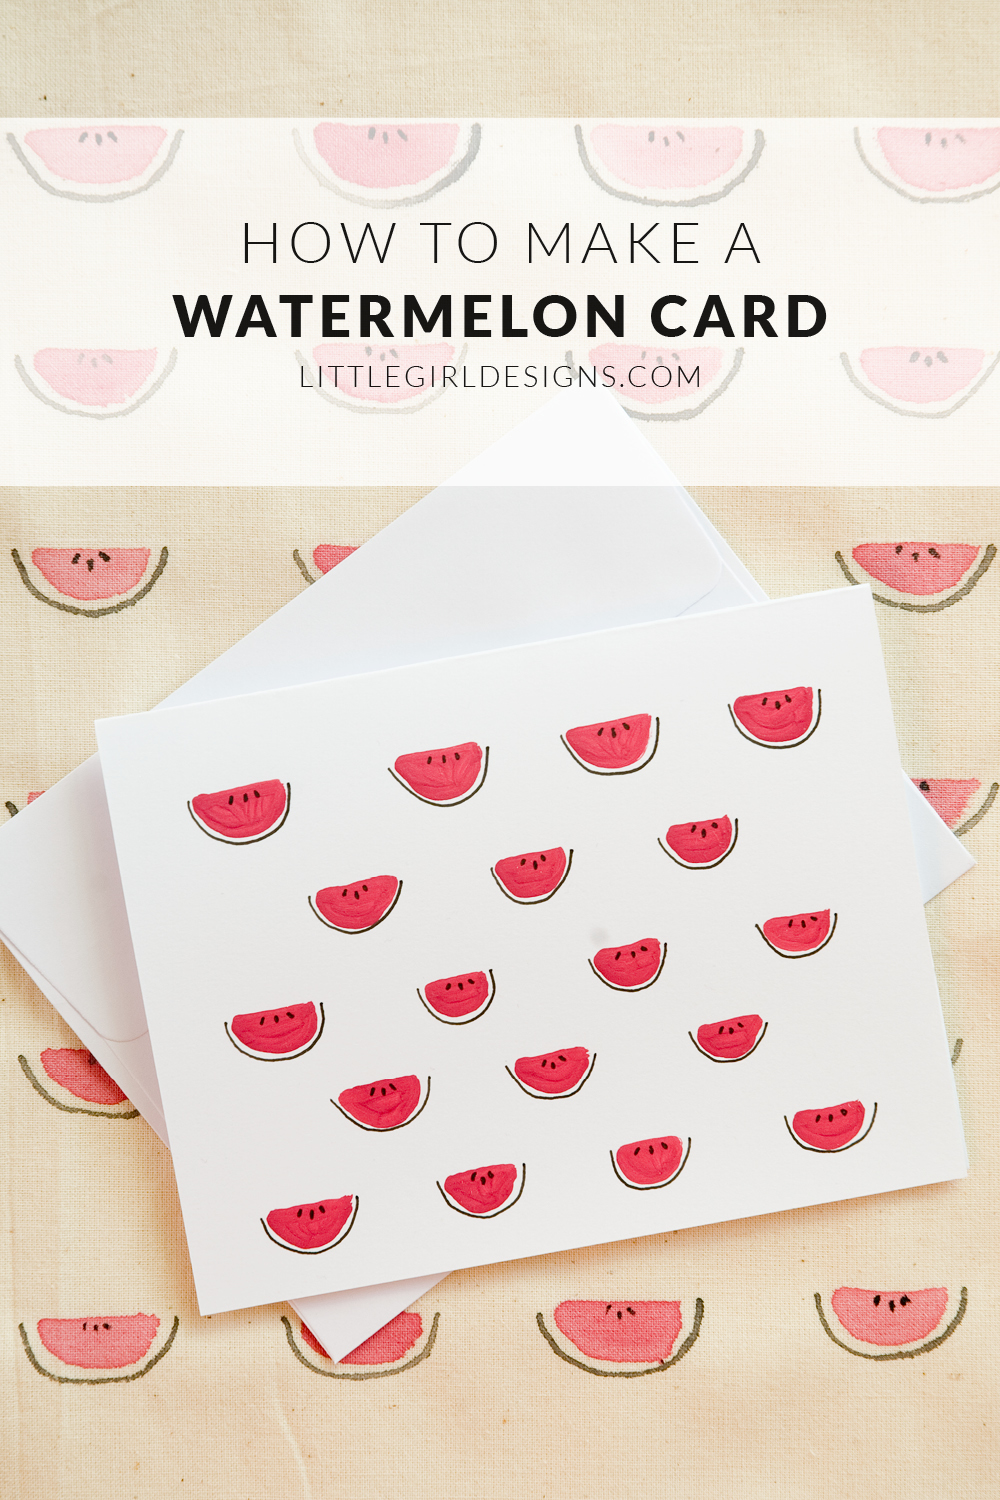 Make a Watermelon Card - Yum! Watermelons are delicious AND cute. Make this card and send some love in the mail. Also a great craft for kids! @ littlegirldesigns.com